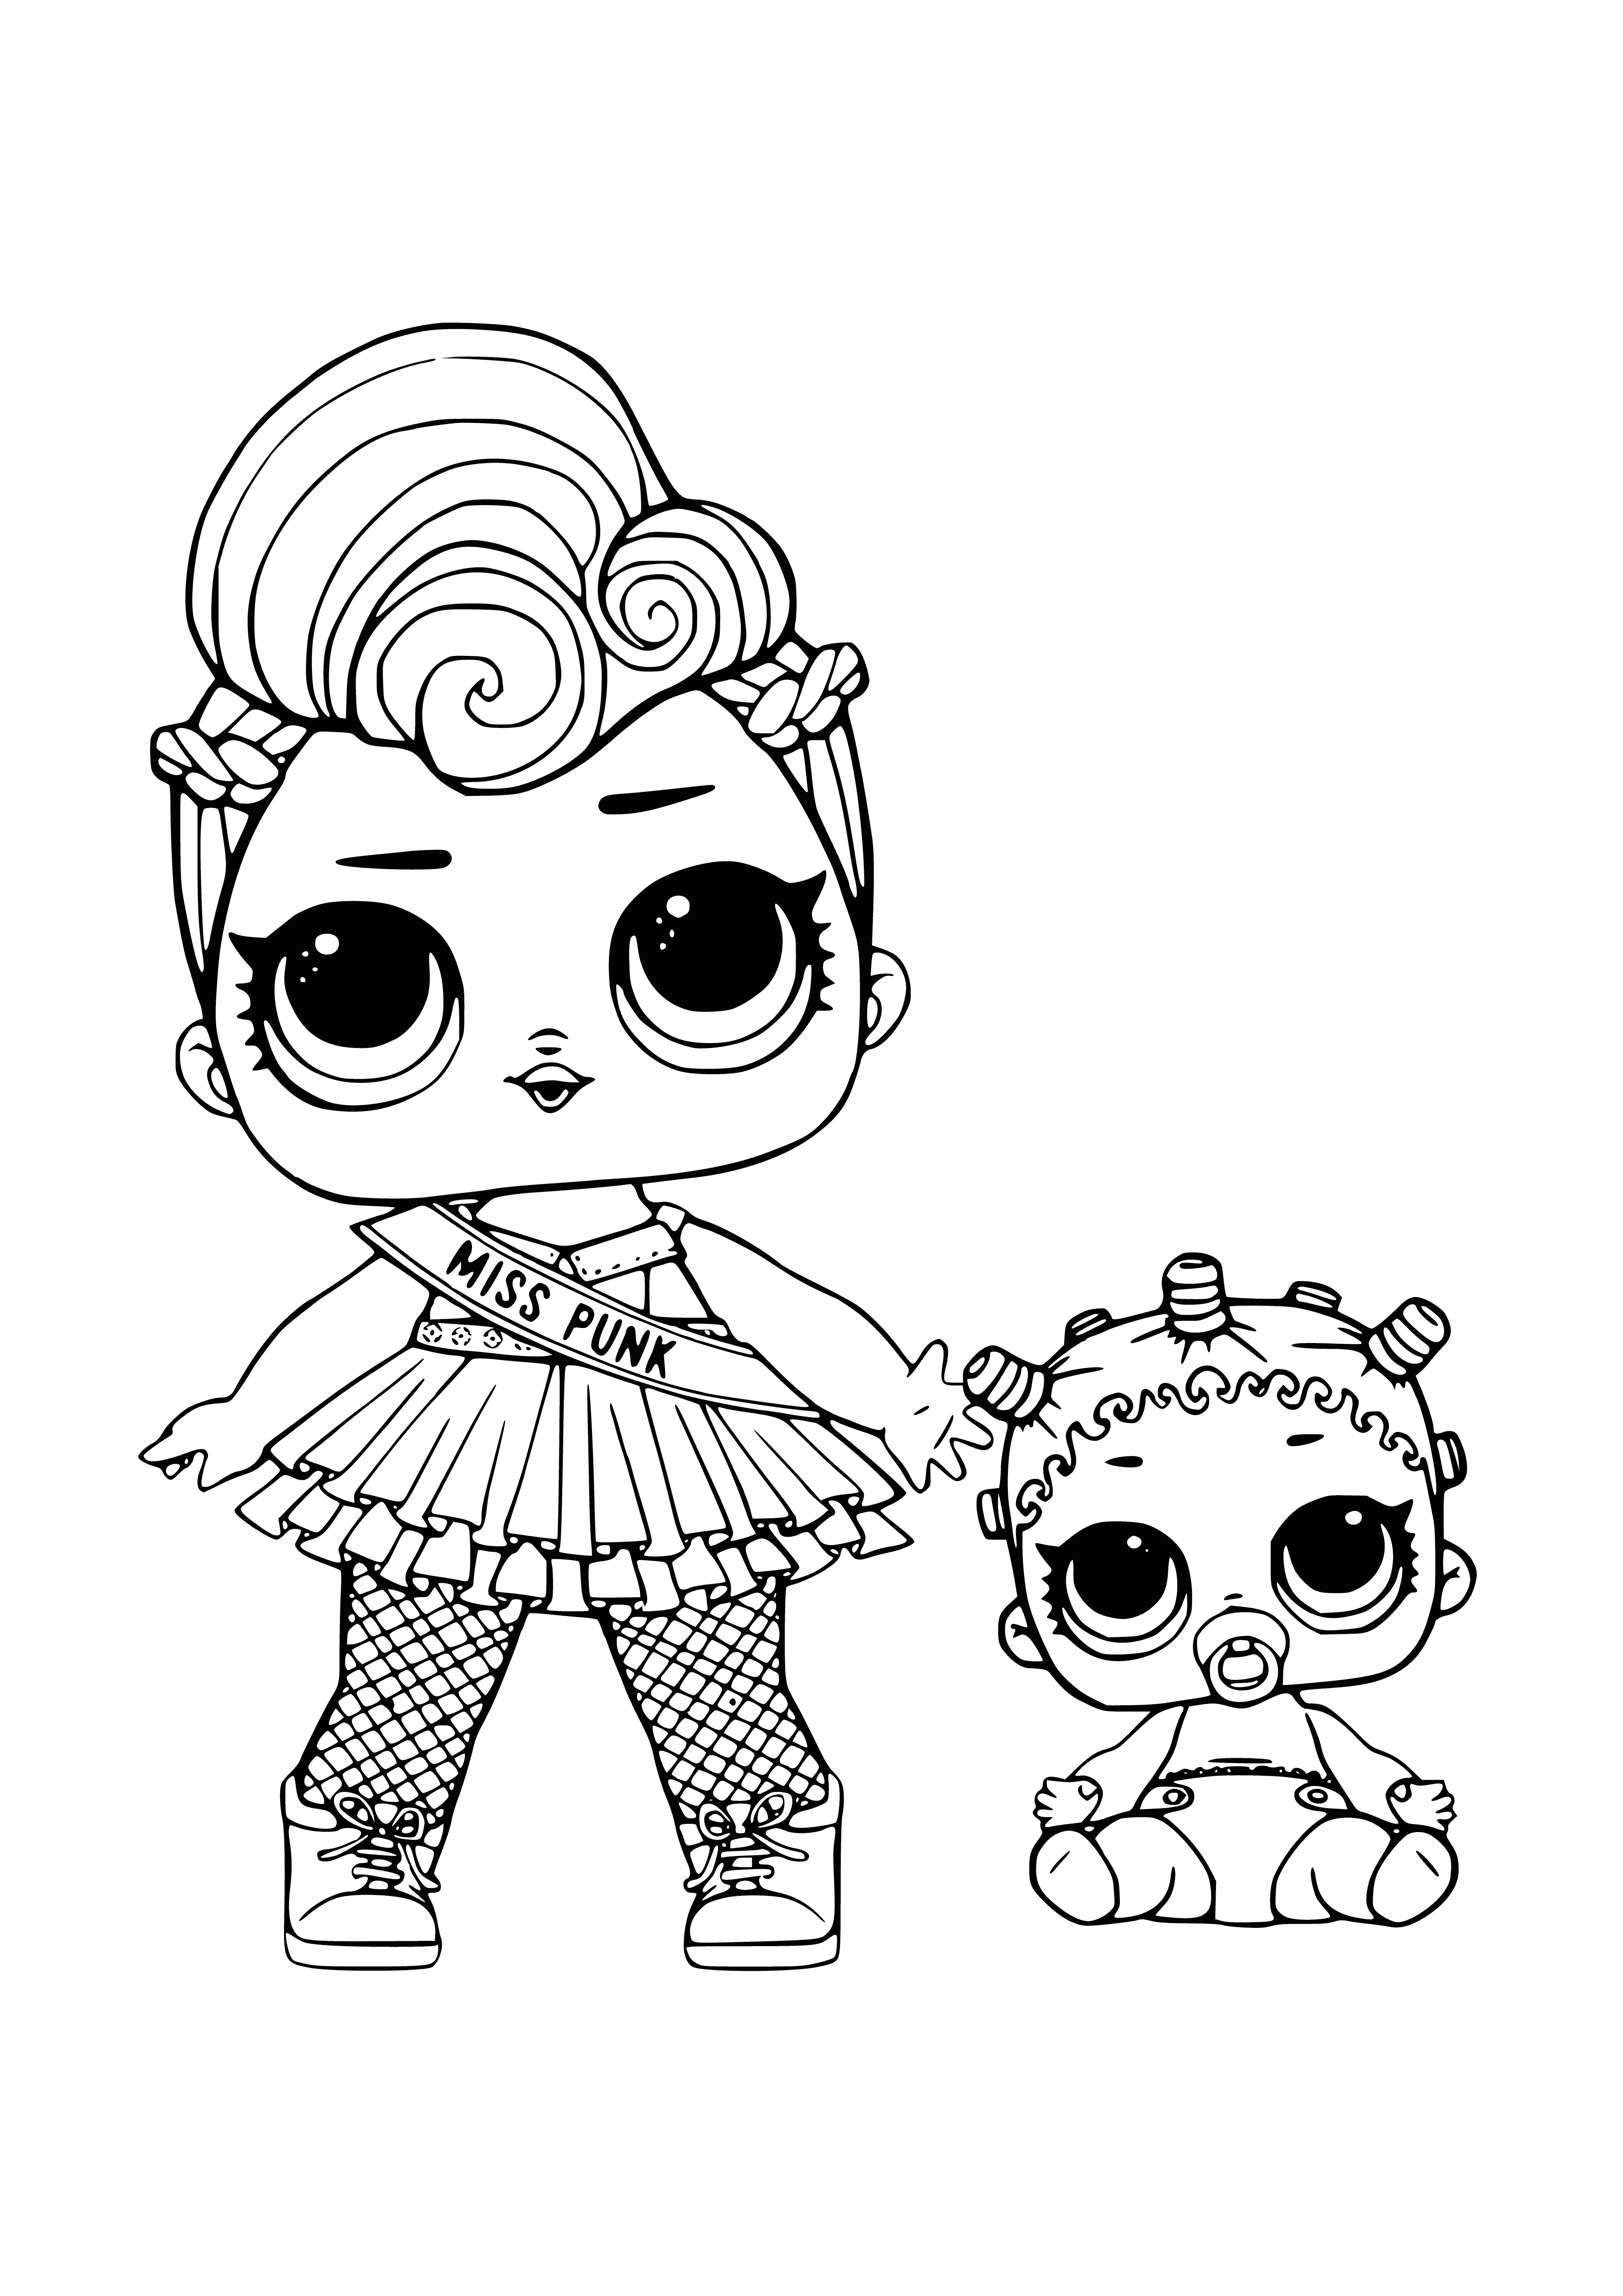 LOL Miss Punk with baby coloring page